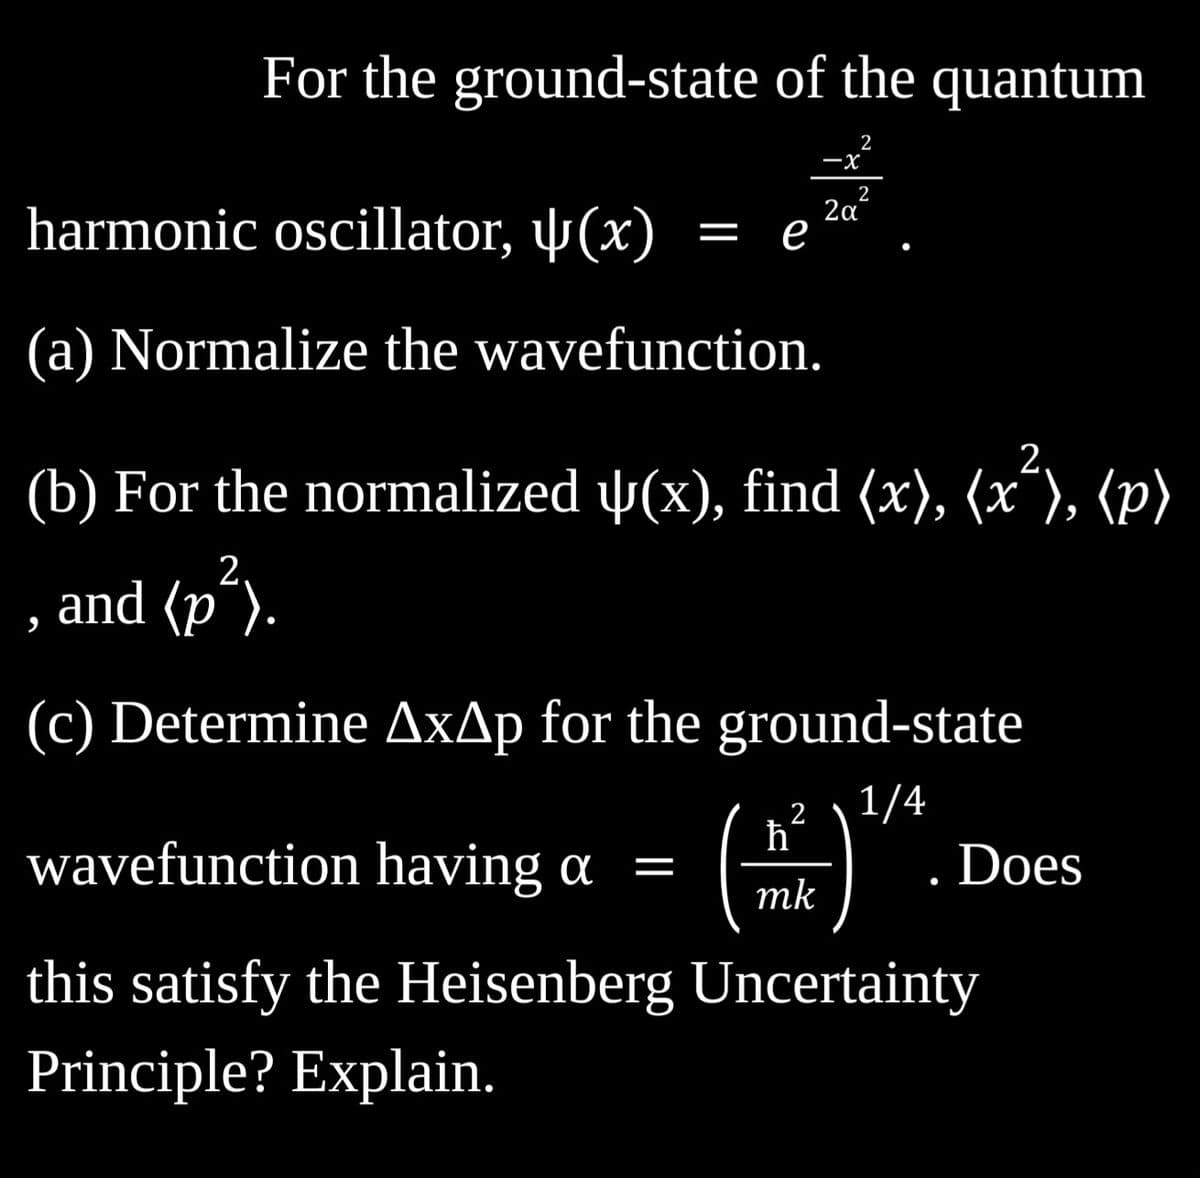 For the ground-state of the quantum
2
harmonic oscillator, (x)
(a) Normalize the wavefunction.
= e
-X
2
ħ
wavefunction having a = (
mk
2
2,
(b) For the normalized ↓(x), find (x), (x²), (p)
, and (p²).
2α
(c) Determine AxAp for the ground-state
1/4
Does
this satisfy the Heisenberg Uncertainty
Principle? Explain.